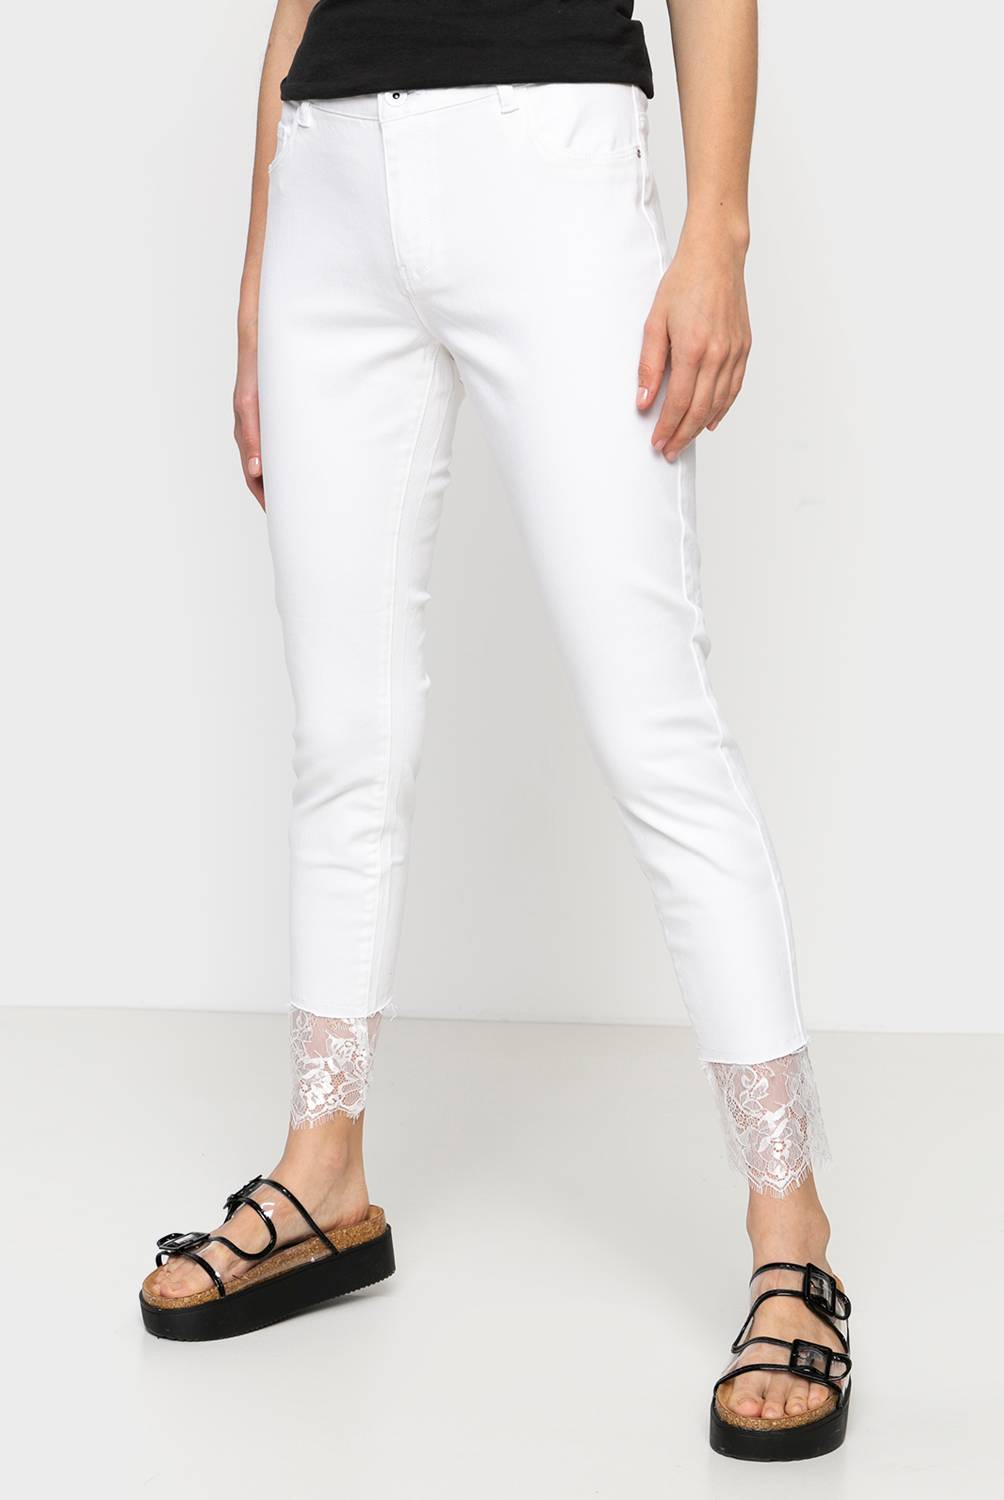 Only - Jeans Mujer